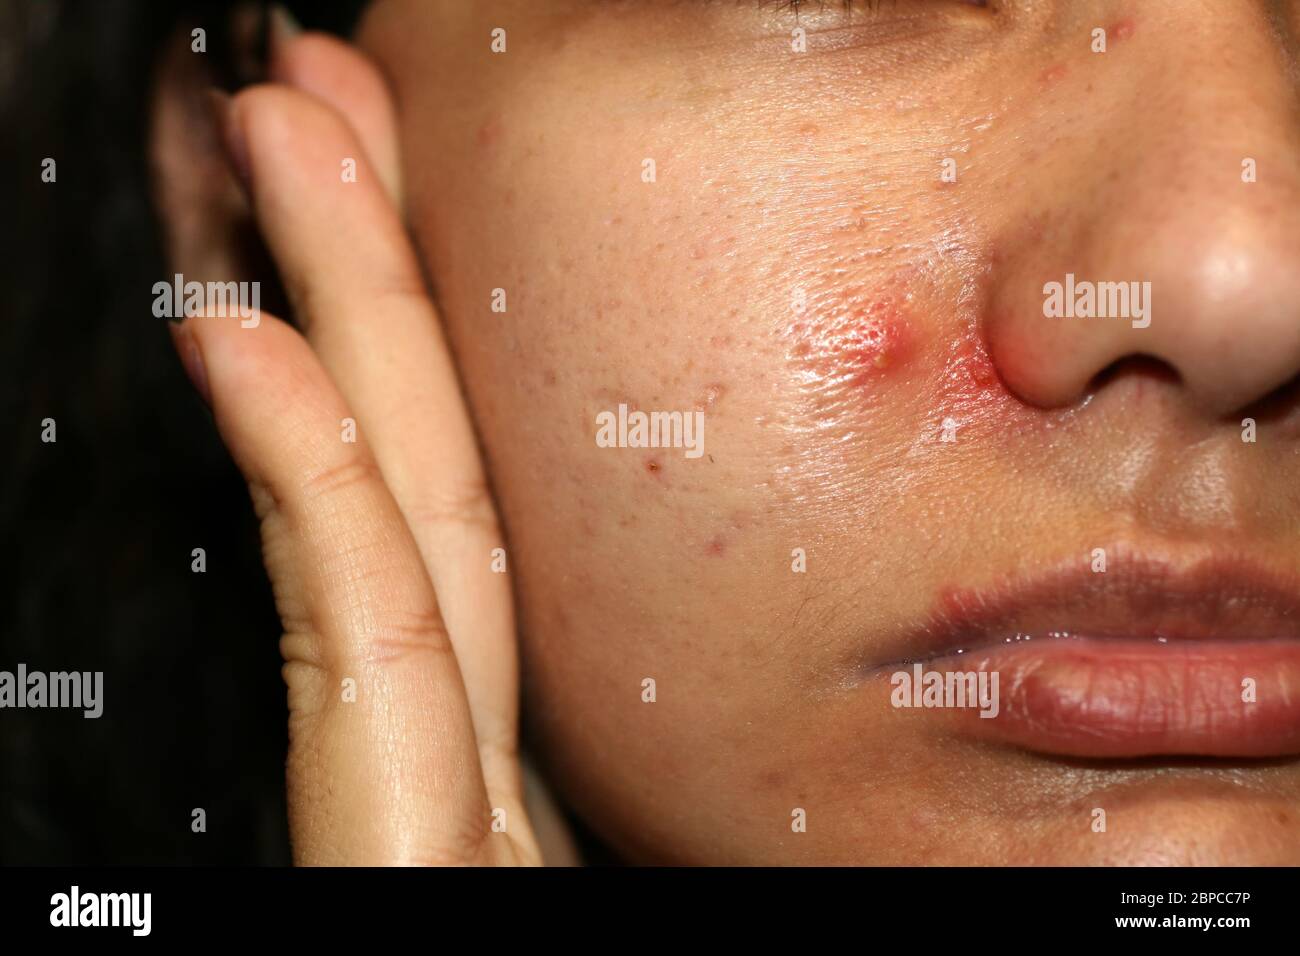 Inflammation on the skin of the face. Red pimples purulent. Acne. Keloid scars. Expanded pores Stock Photo